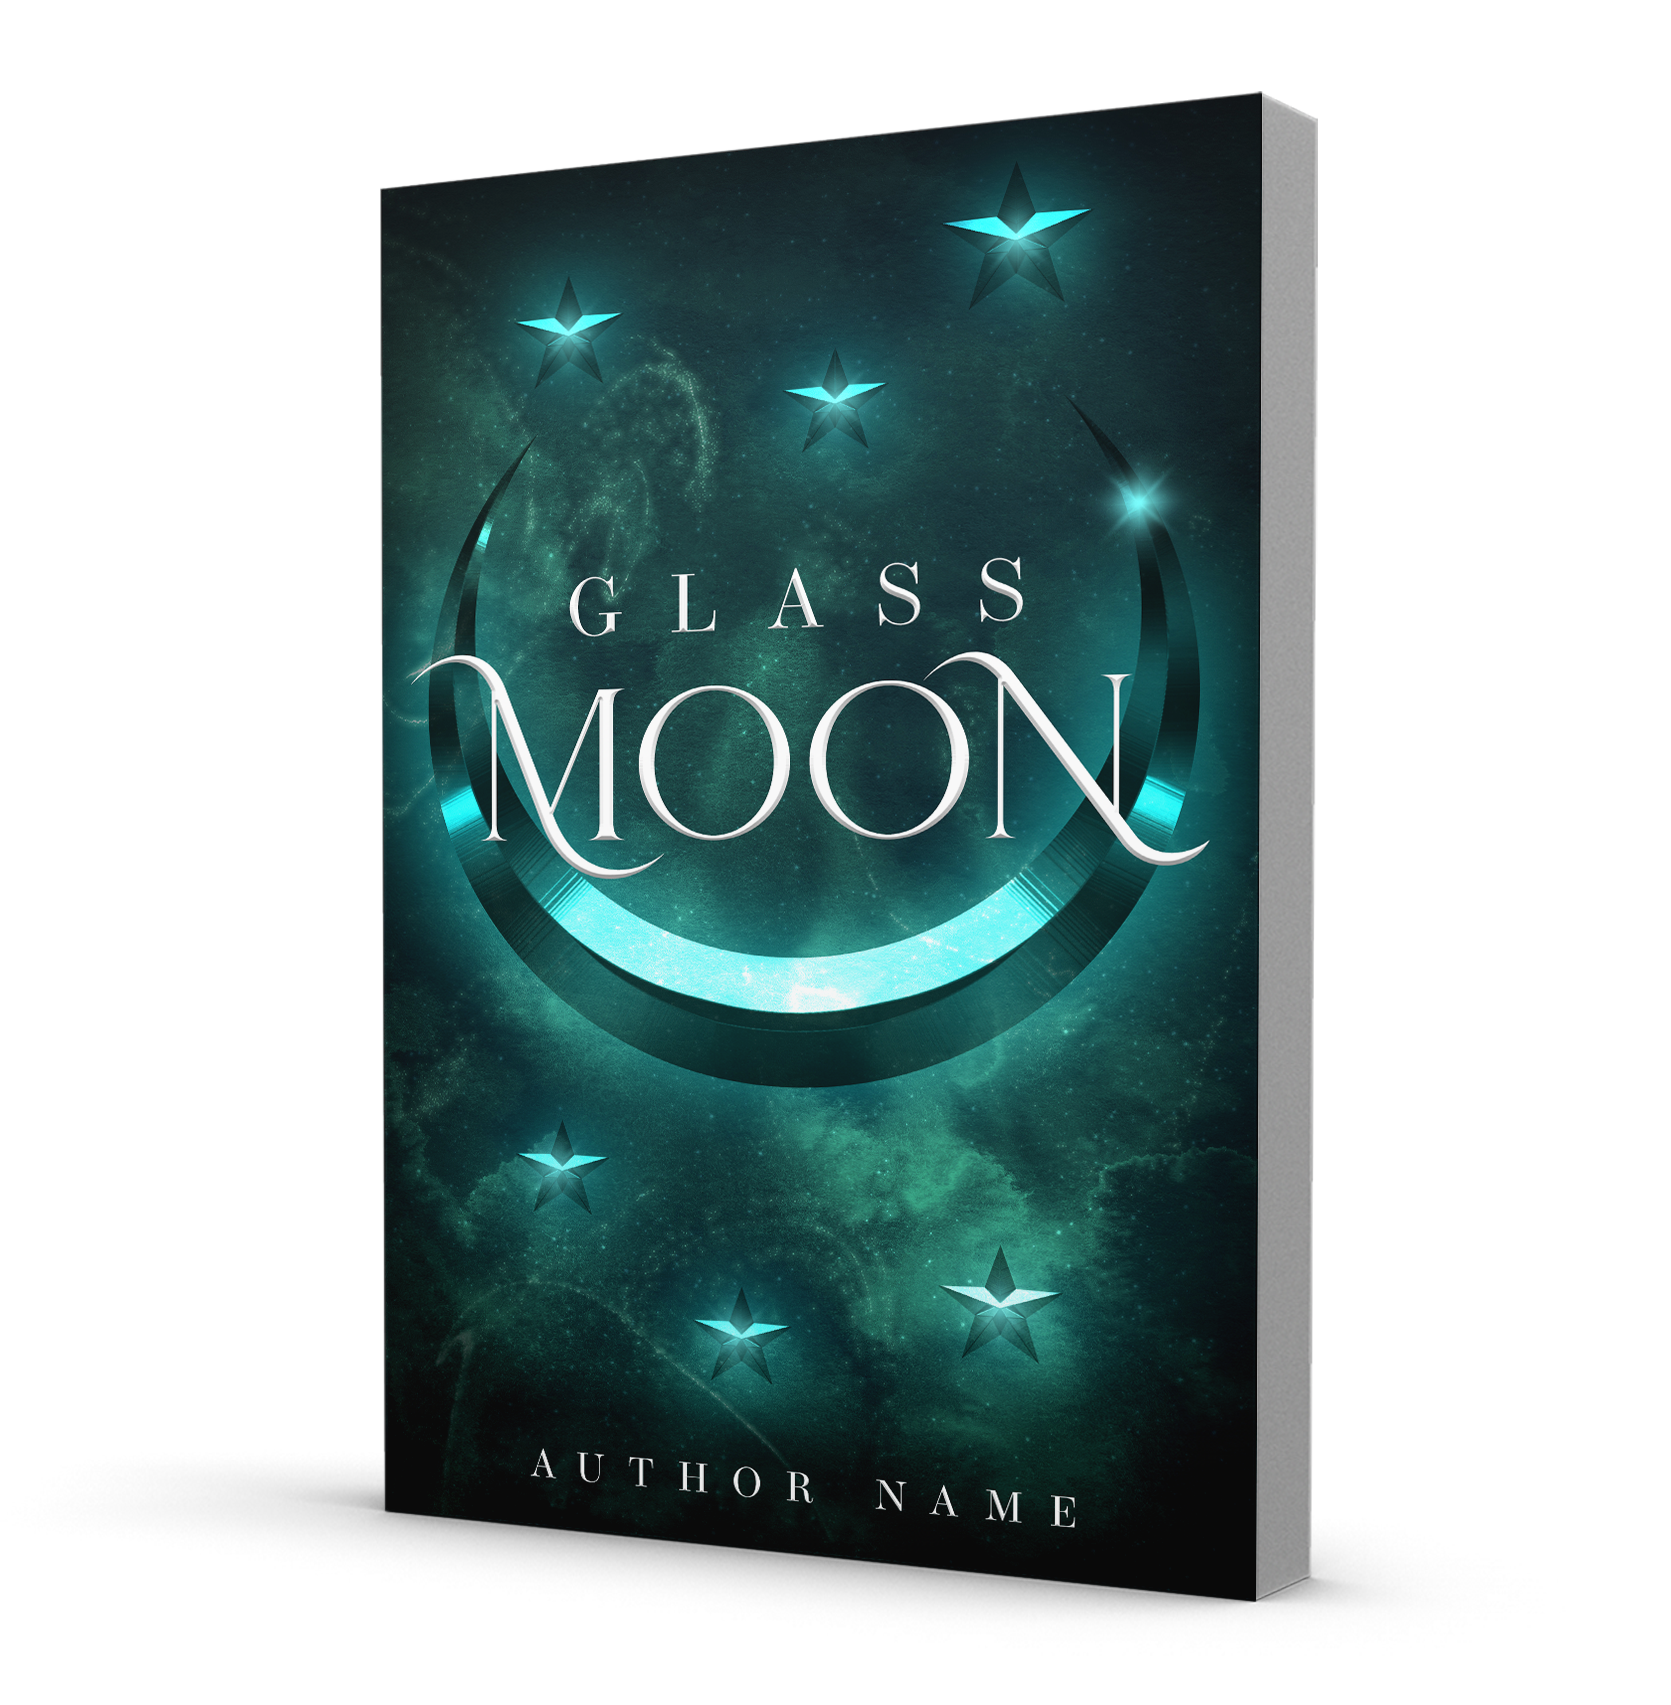 A pre-made dark fantasy book cover showing a glowing glass moon and stars.